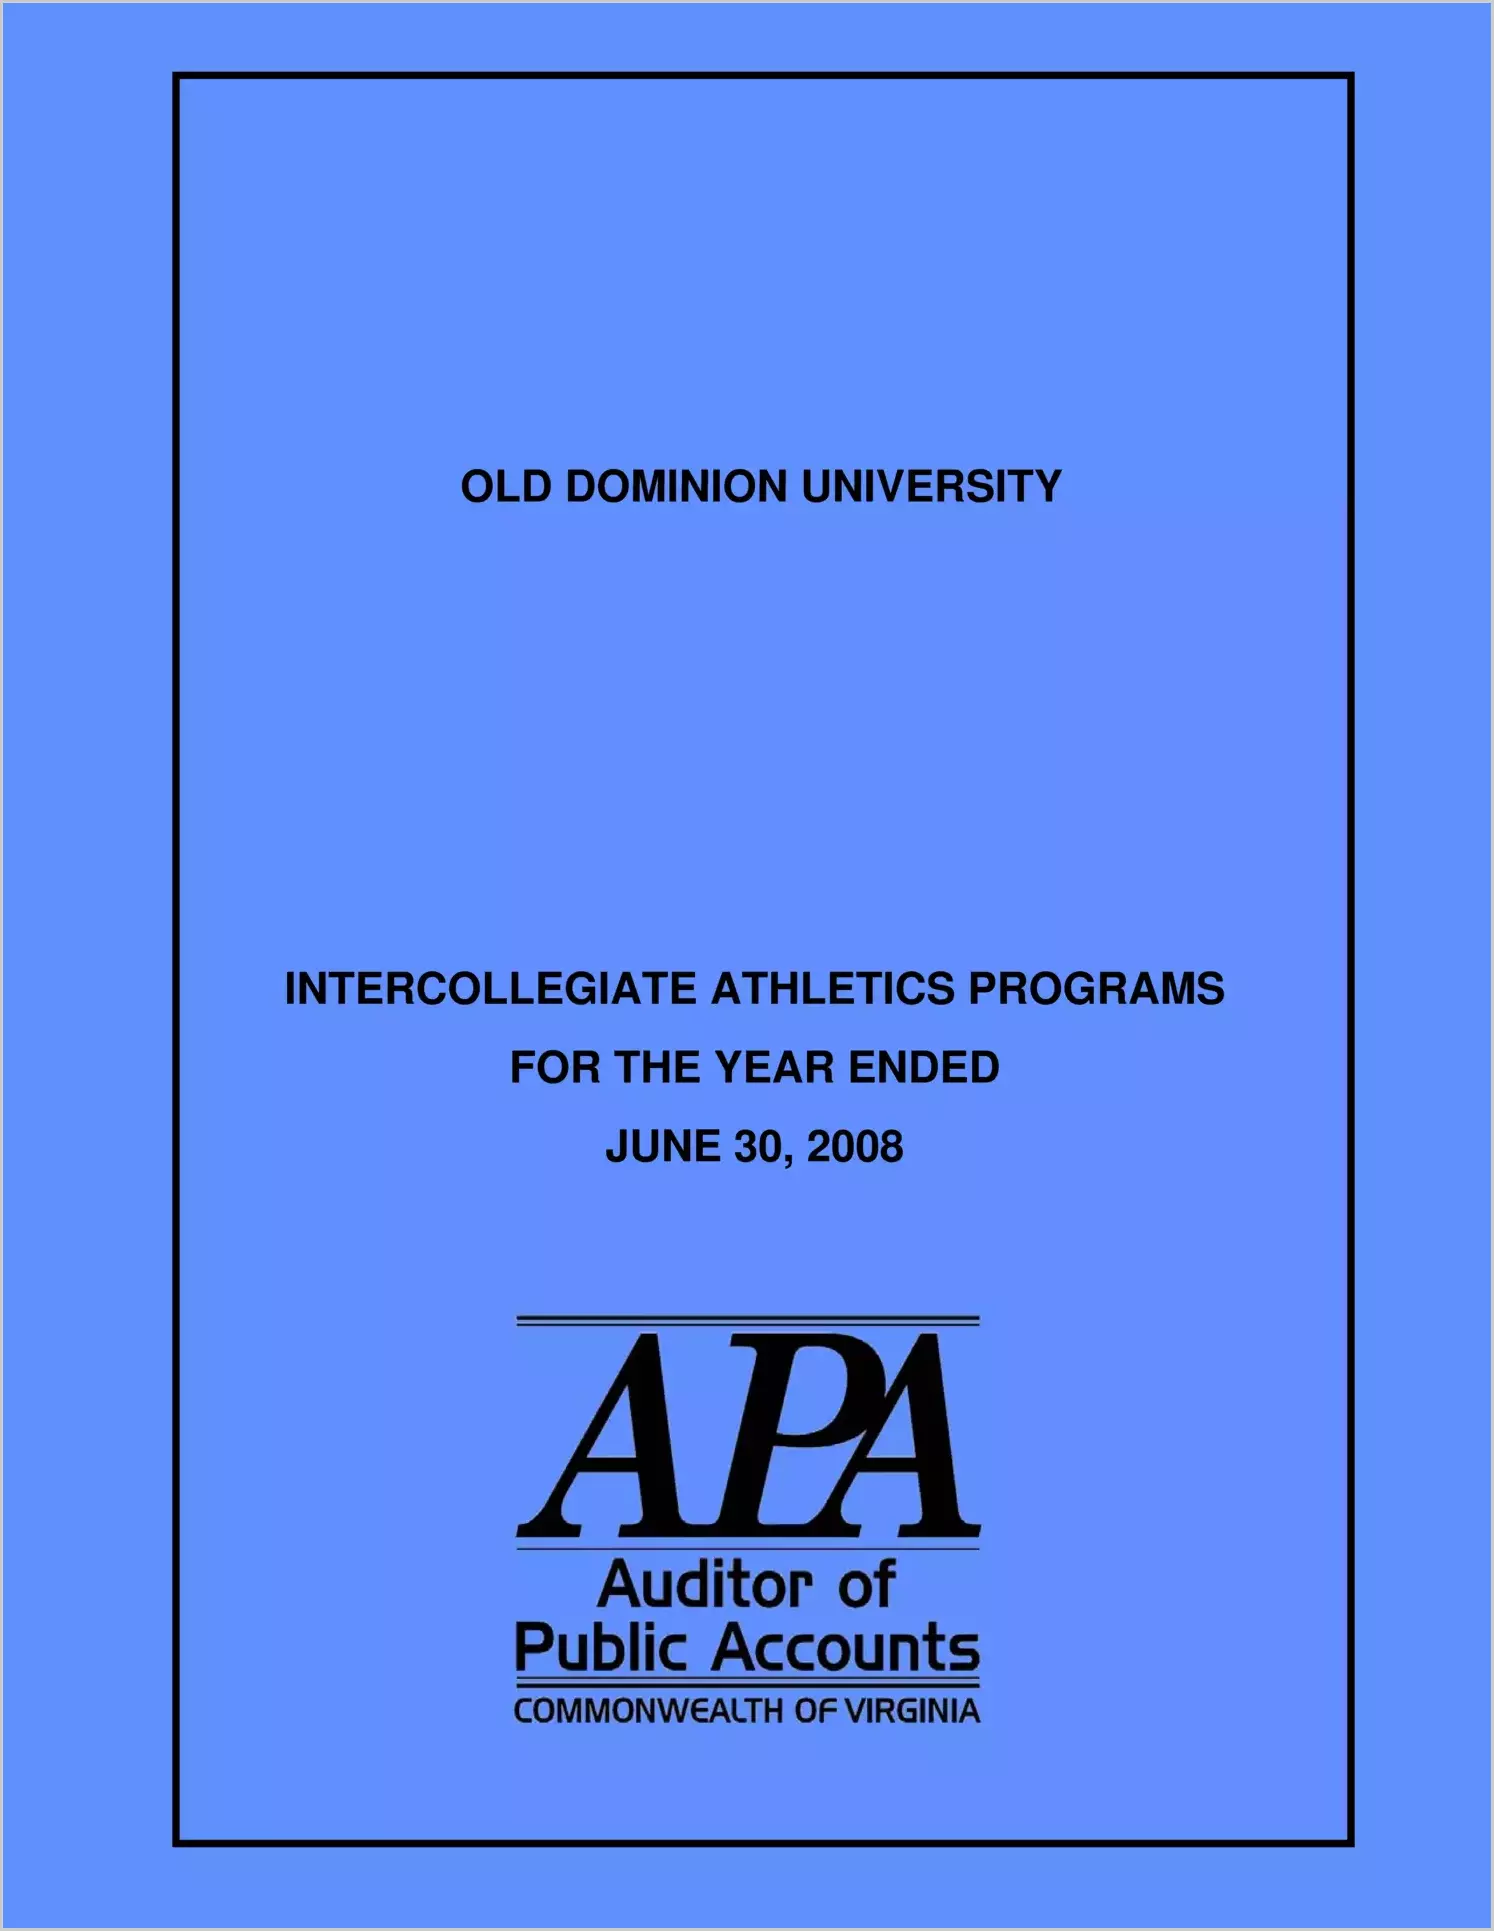 Old Dominion University Intercollegiate Athletic Programs for the year ended June 30, 2008